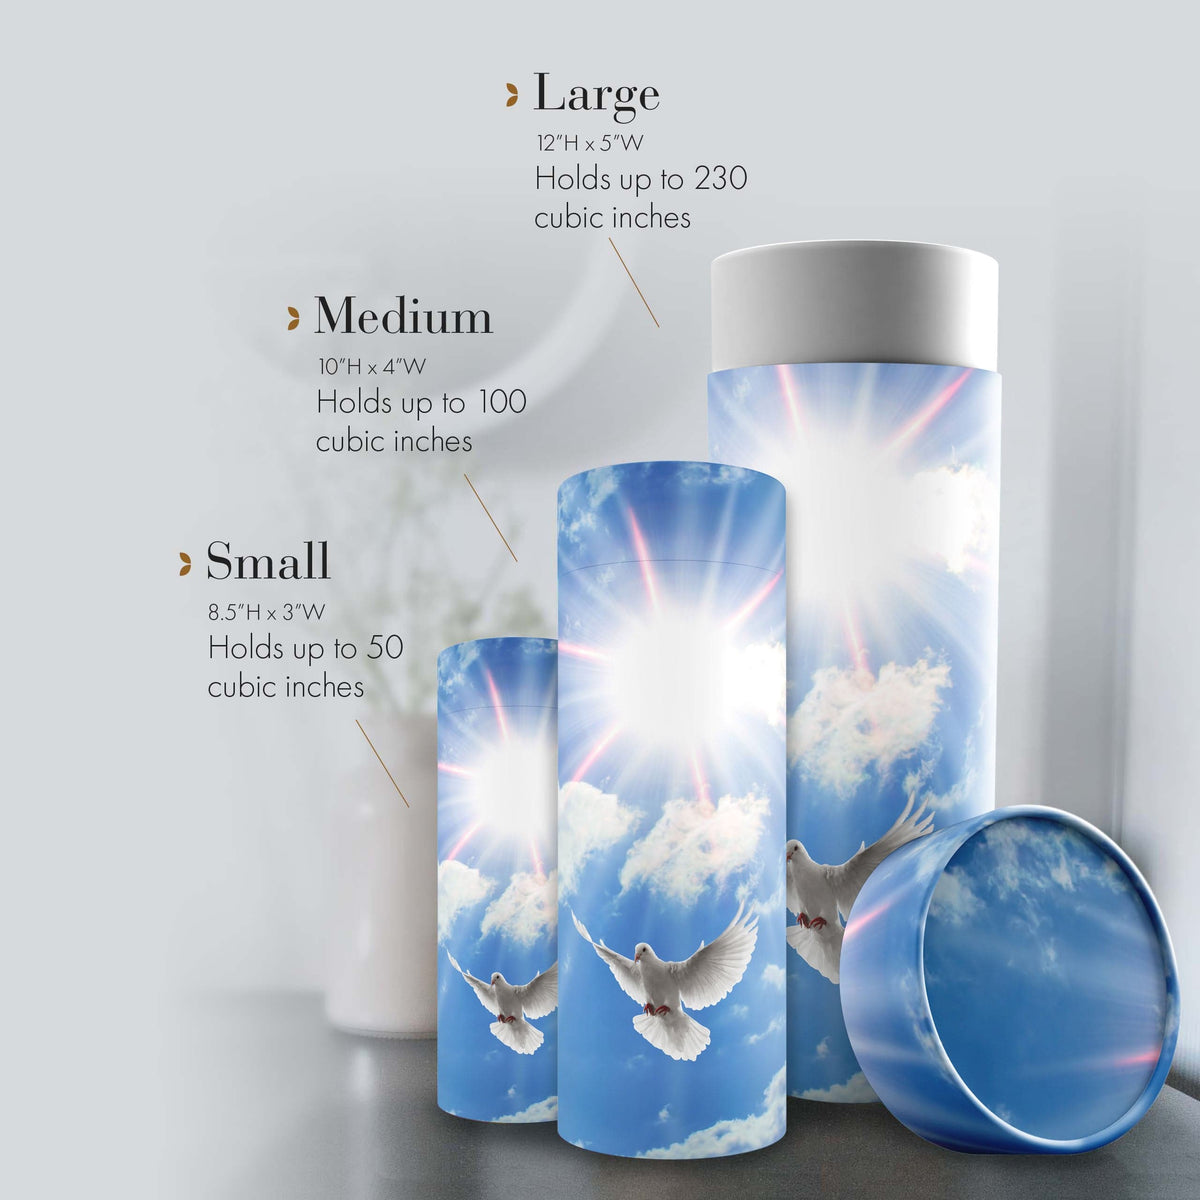 Commemorative Cremation Urns Holy Doves - Biodegradable &amp; Eco Friendly Burial or Scattering Urn / Tube